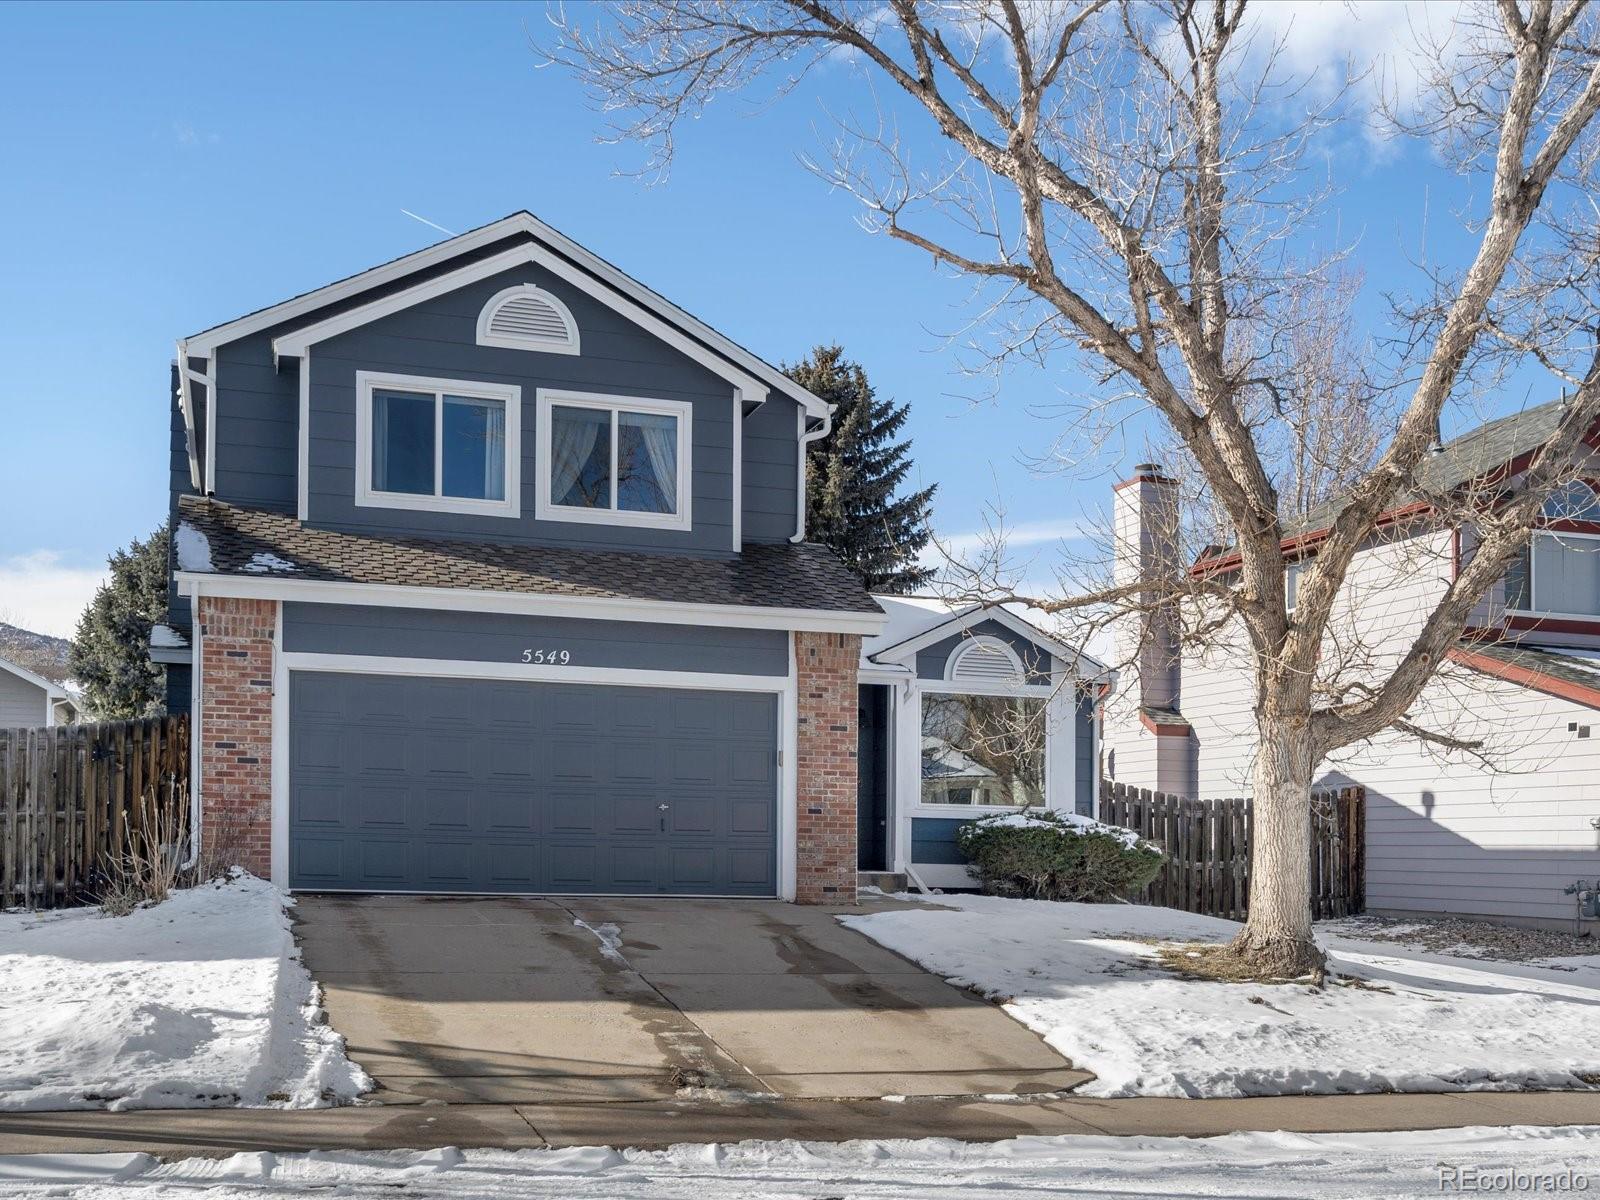 Report Image for 5549 S Youngfield Way,Littleton, Colorado